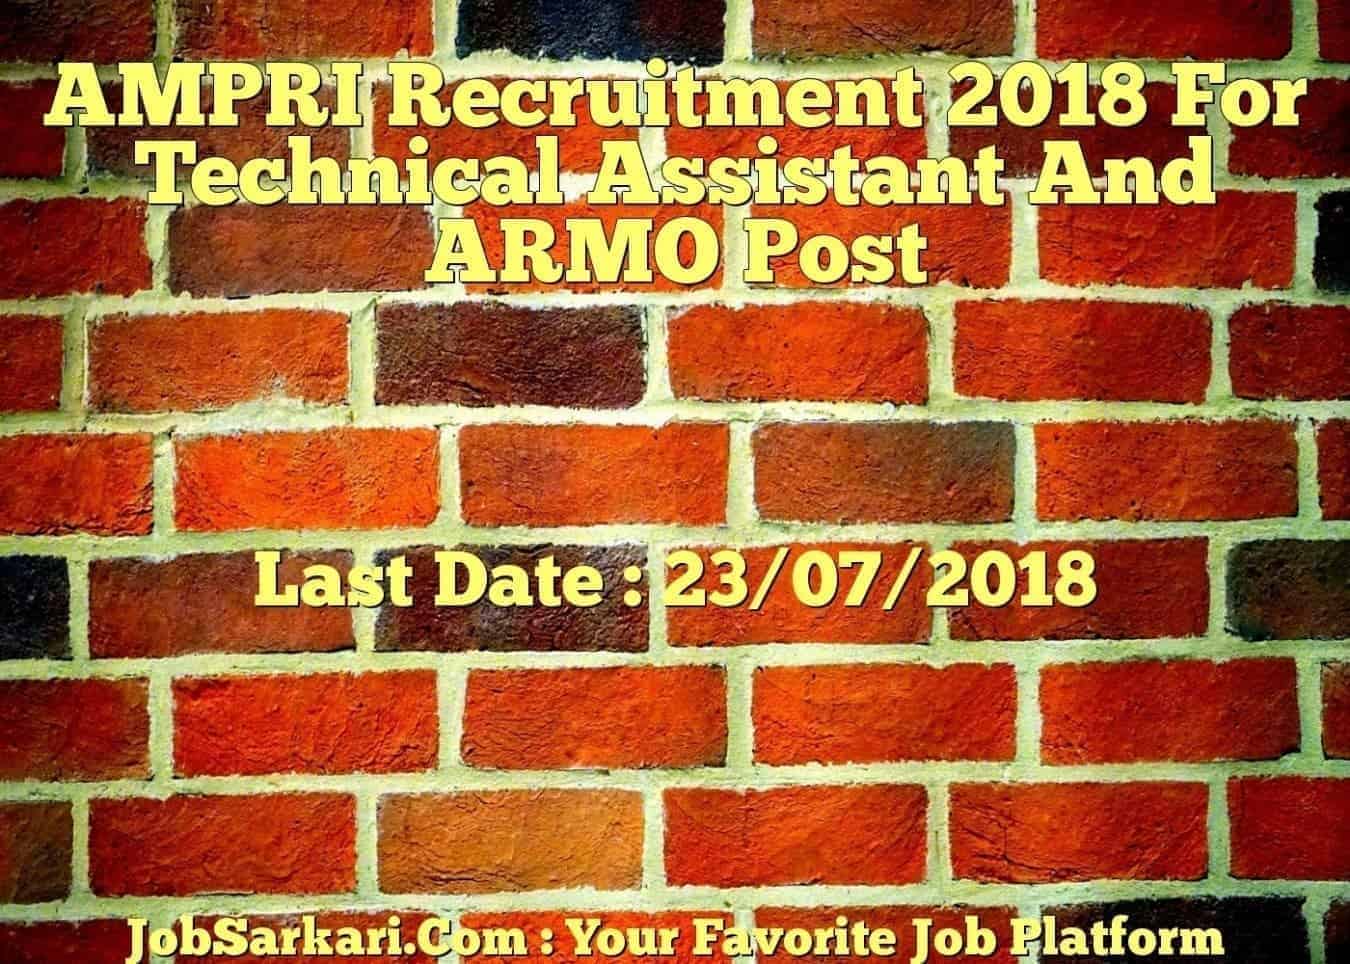 AMPRI Recruitment 2018 For Technical Assistant And ARMO Post